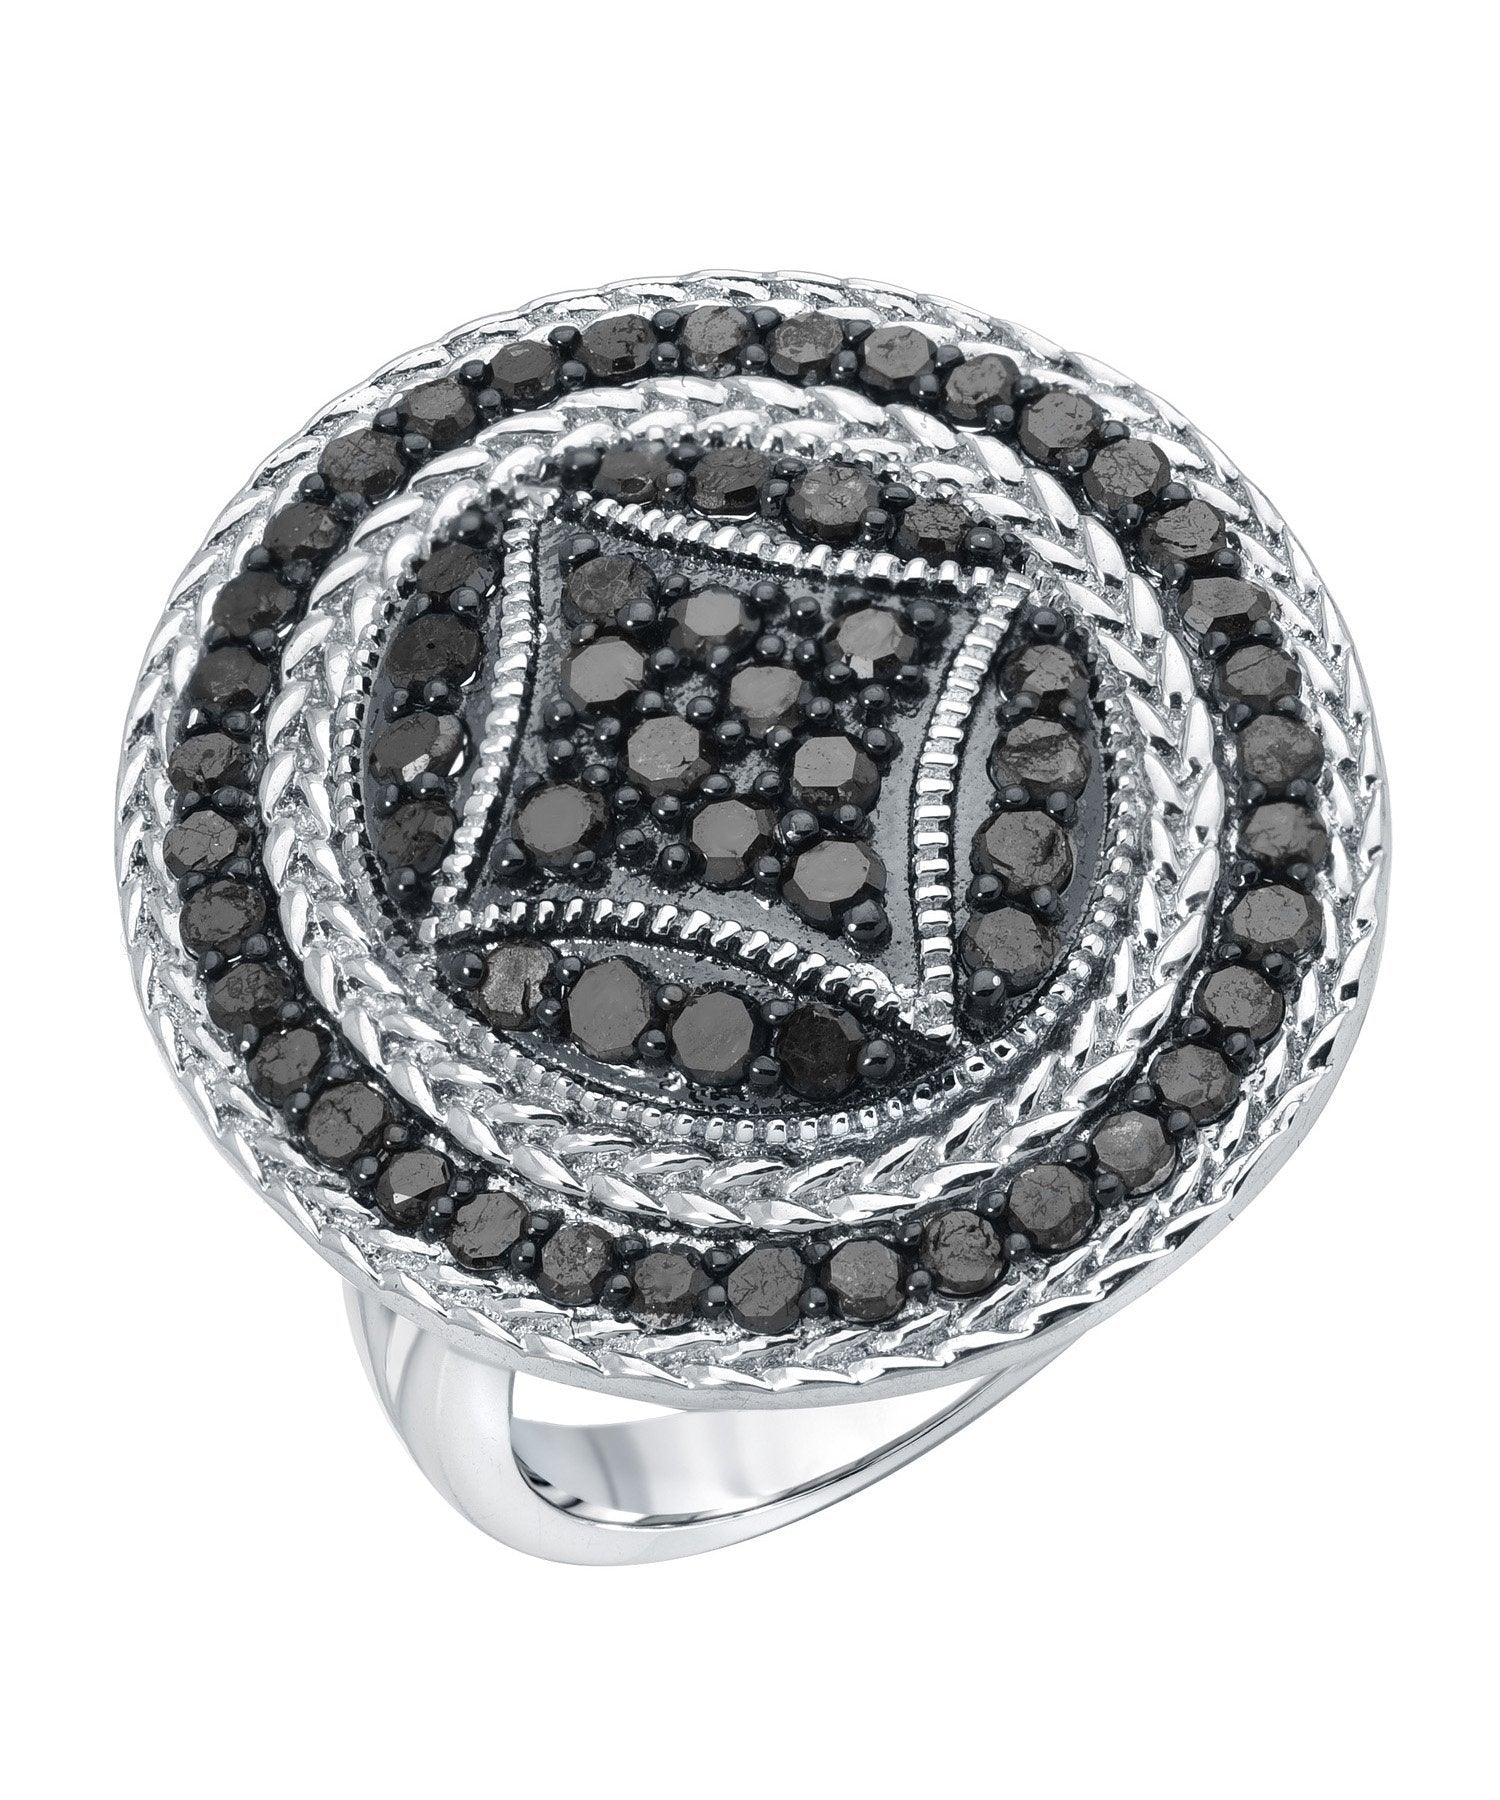 2.00ctw Black Diamond Rhodium Plated 925 Sterling Silver Cocktail Ring View 1